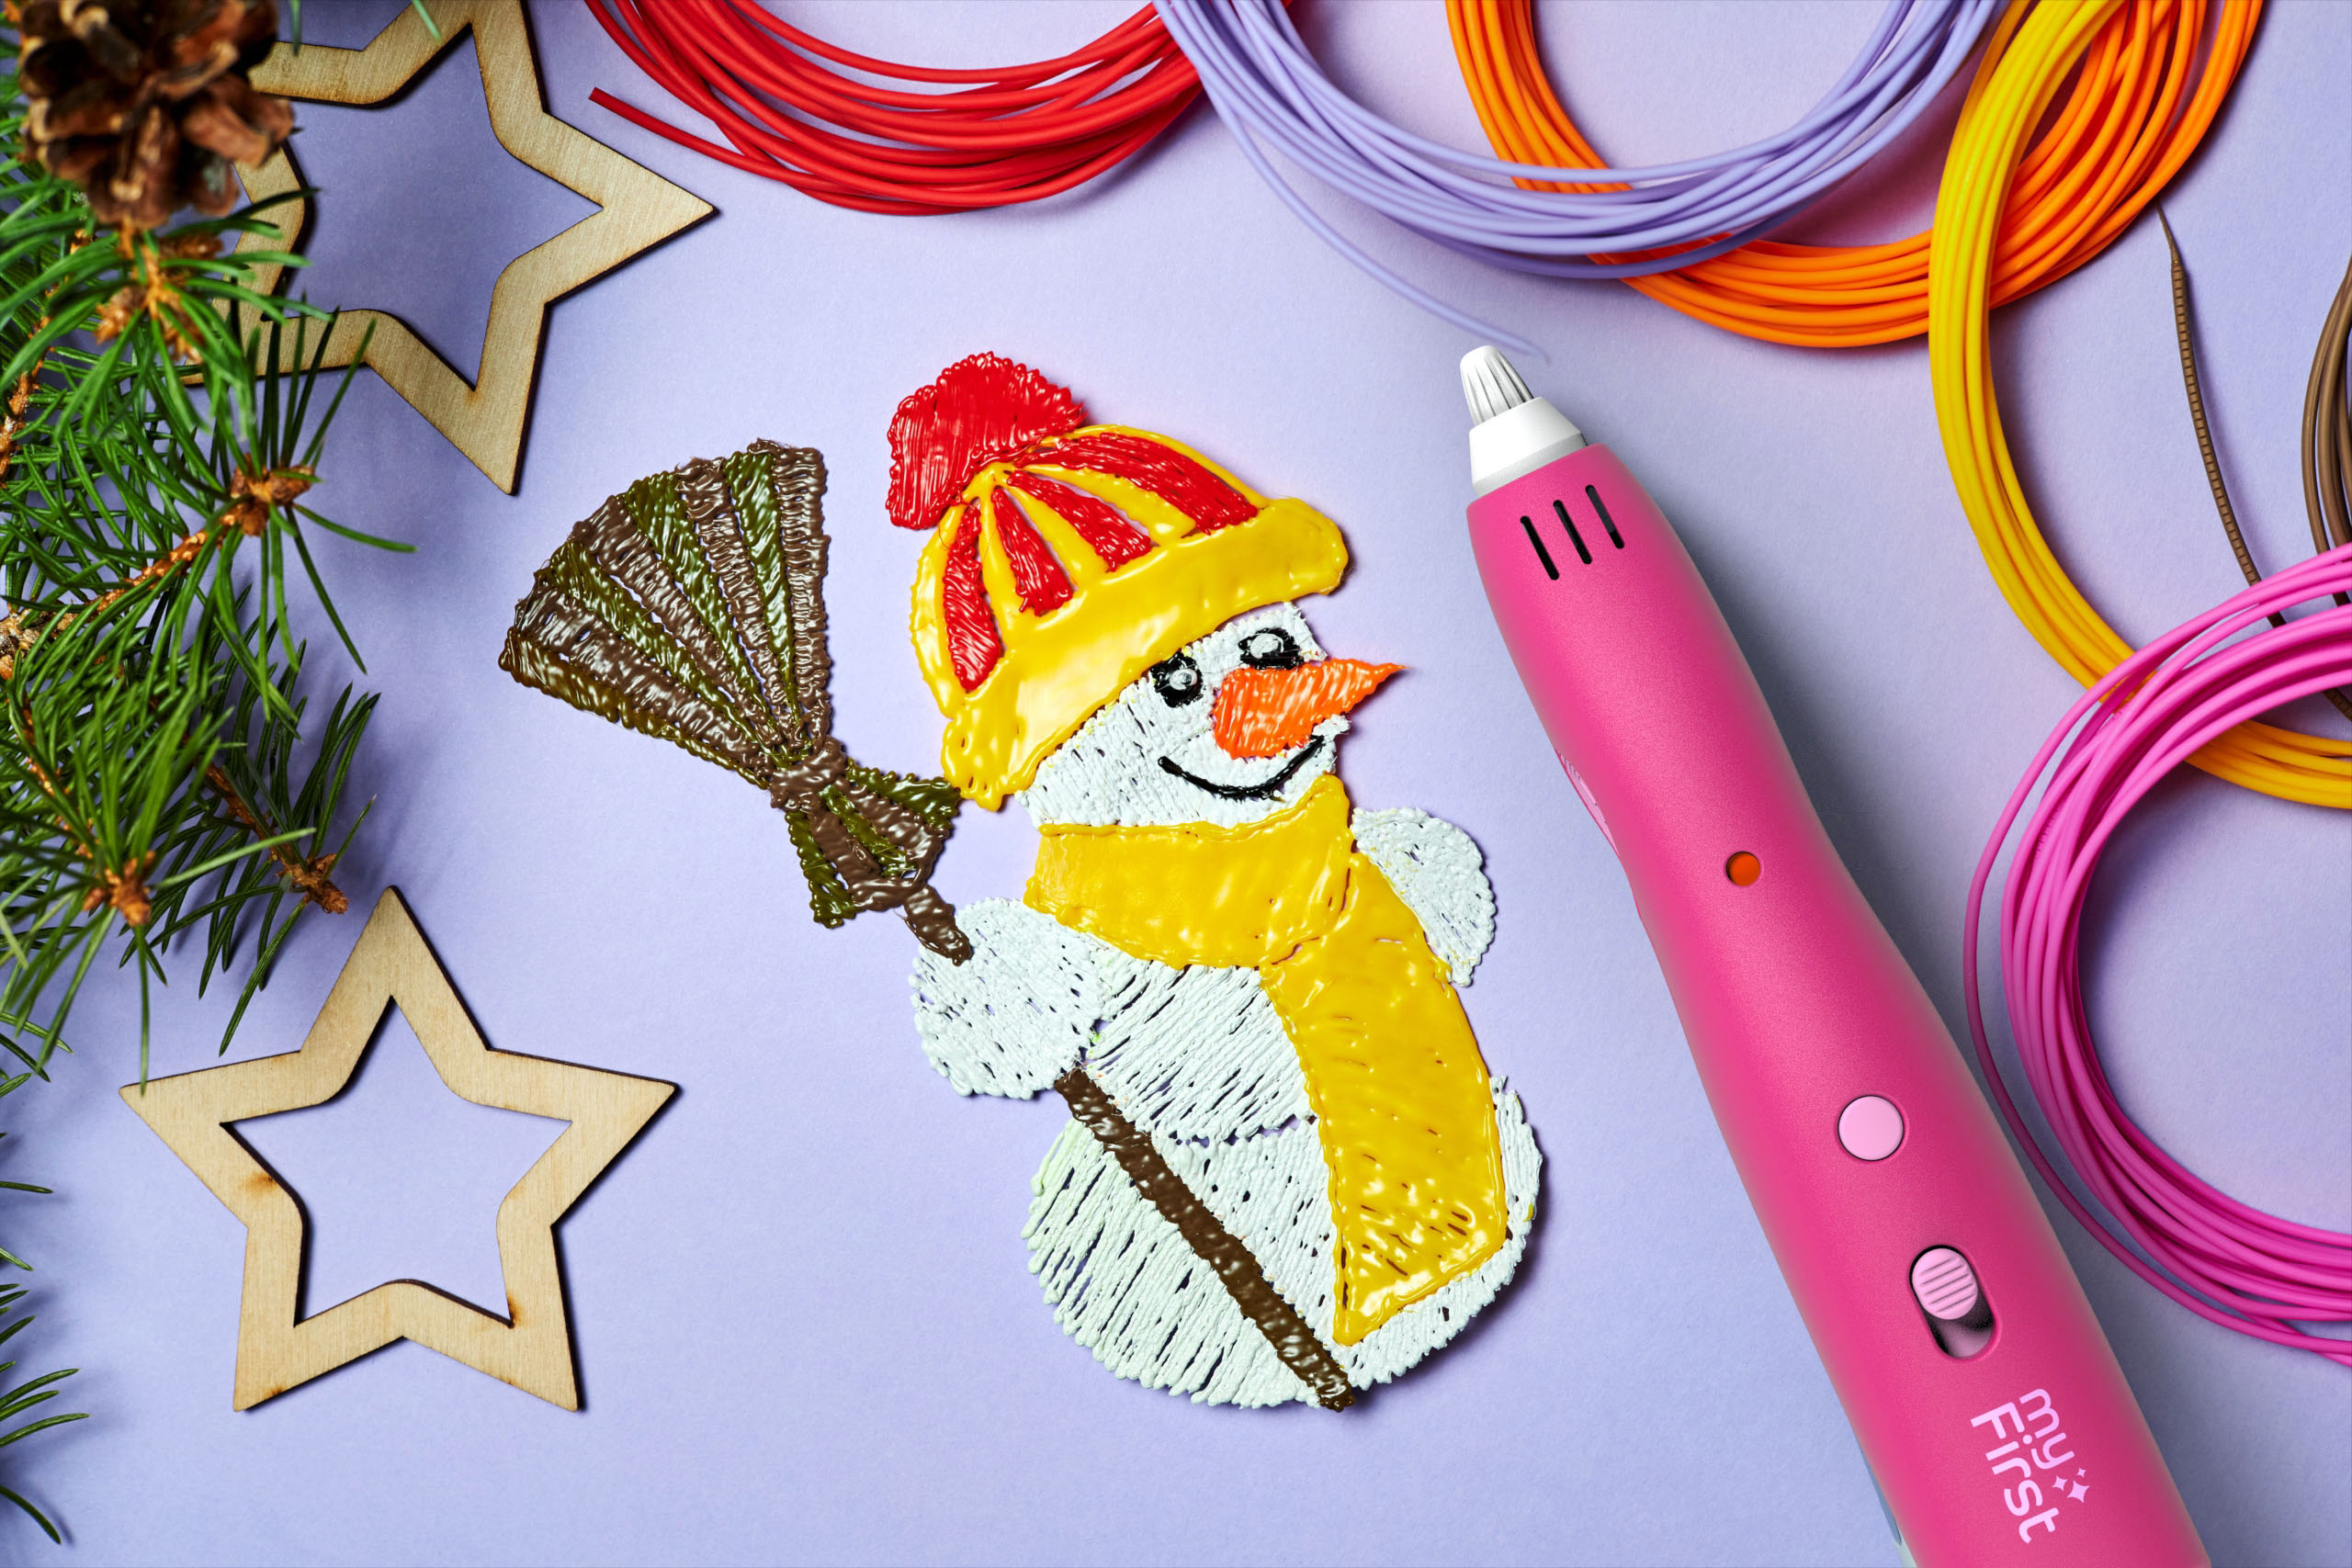 Get Ready to Doodle With The First 3D Drawing Pen